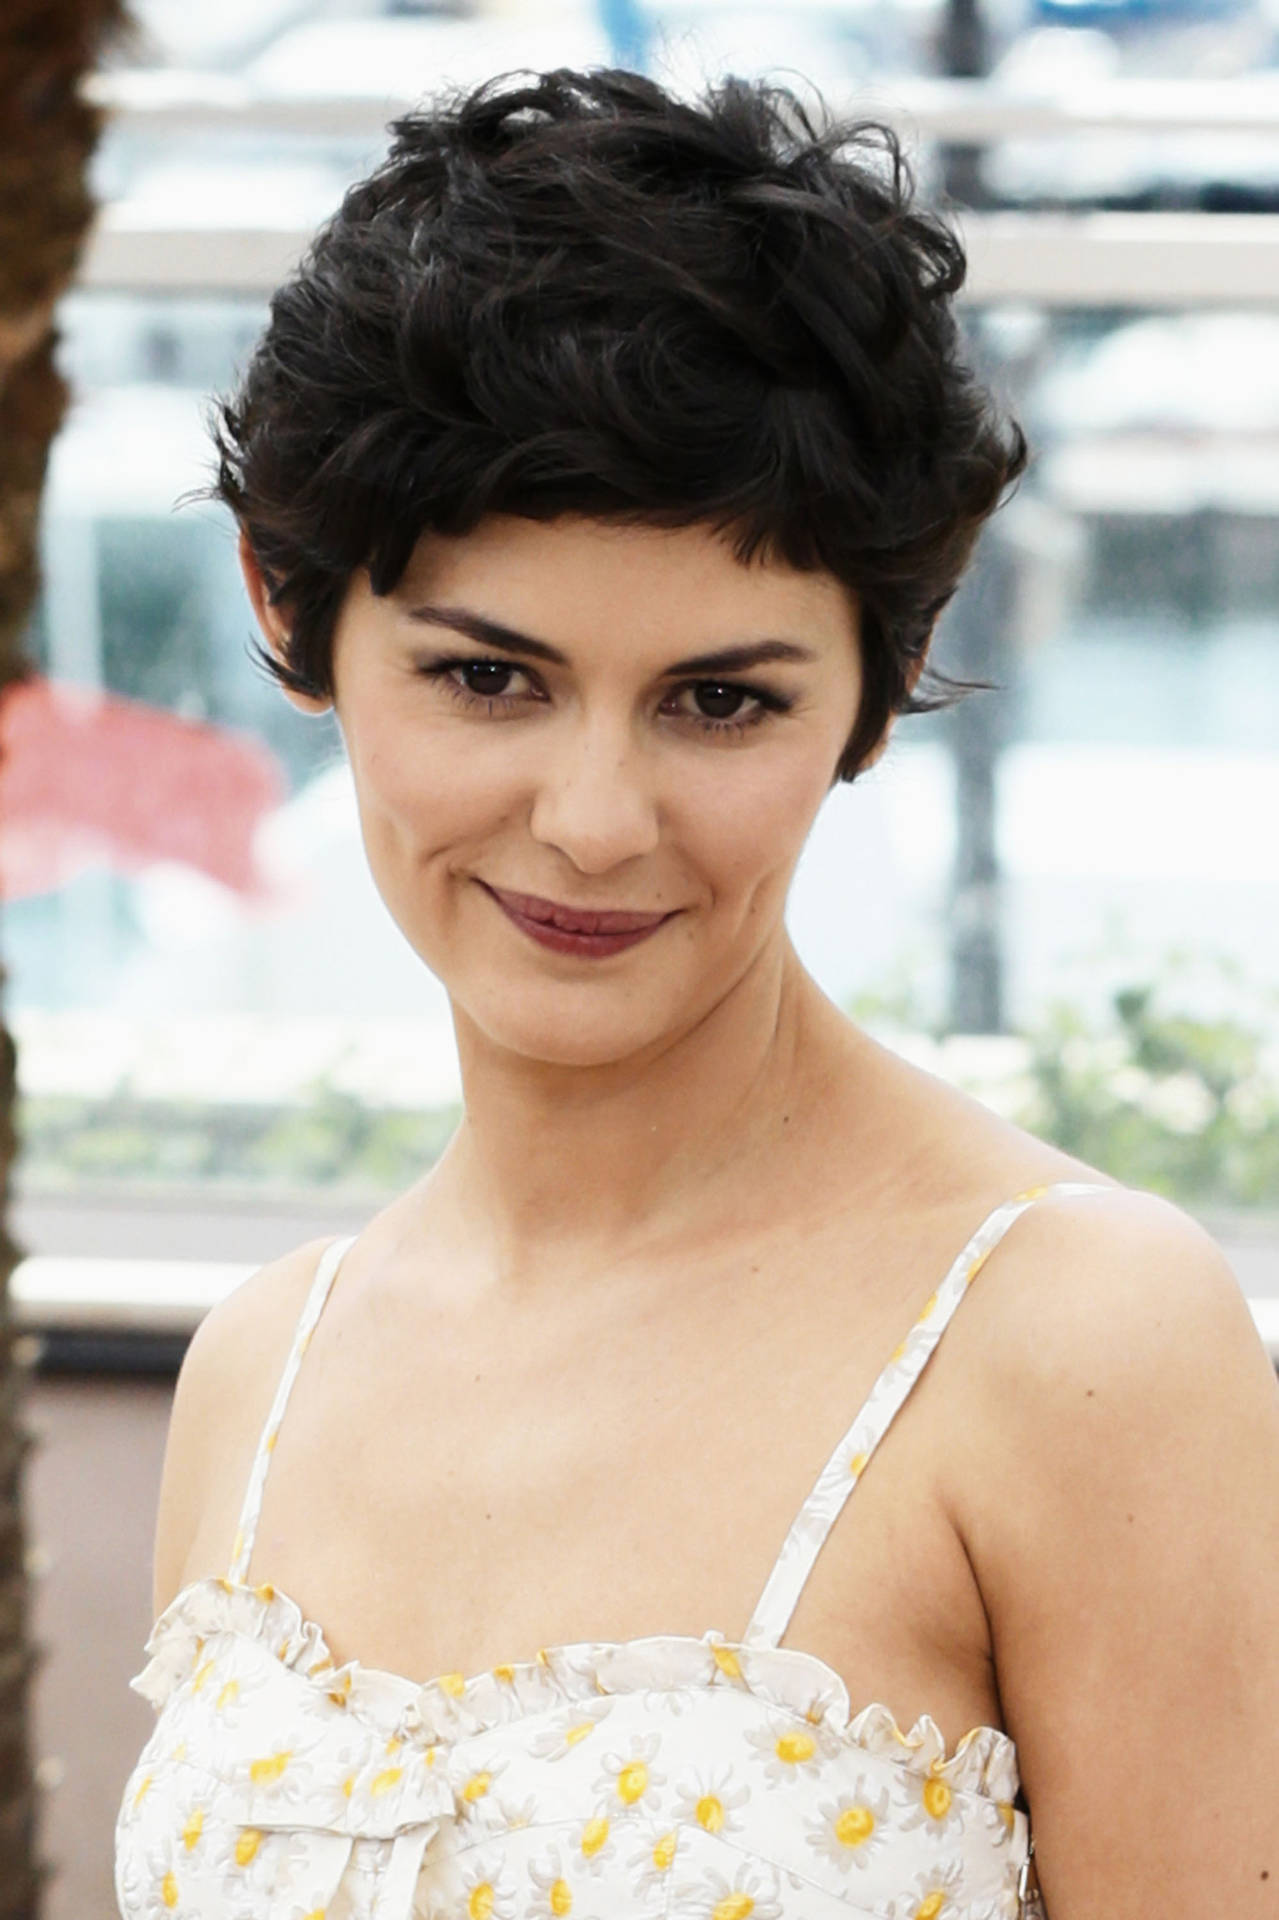 Audrey Tautou wearing a chic pixie cut hairstyle and elegant white dress. Wallpaper